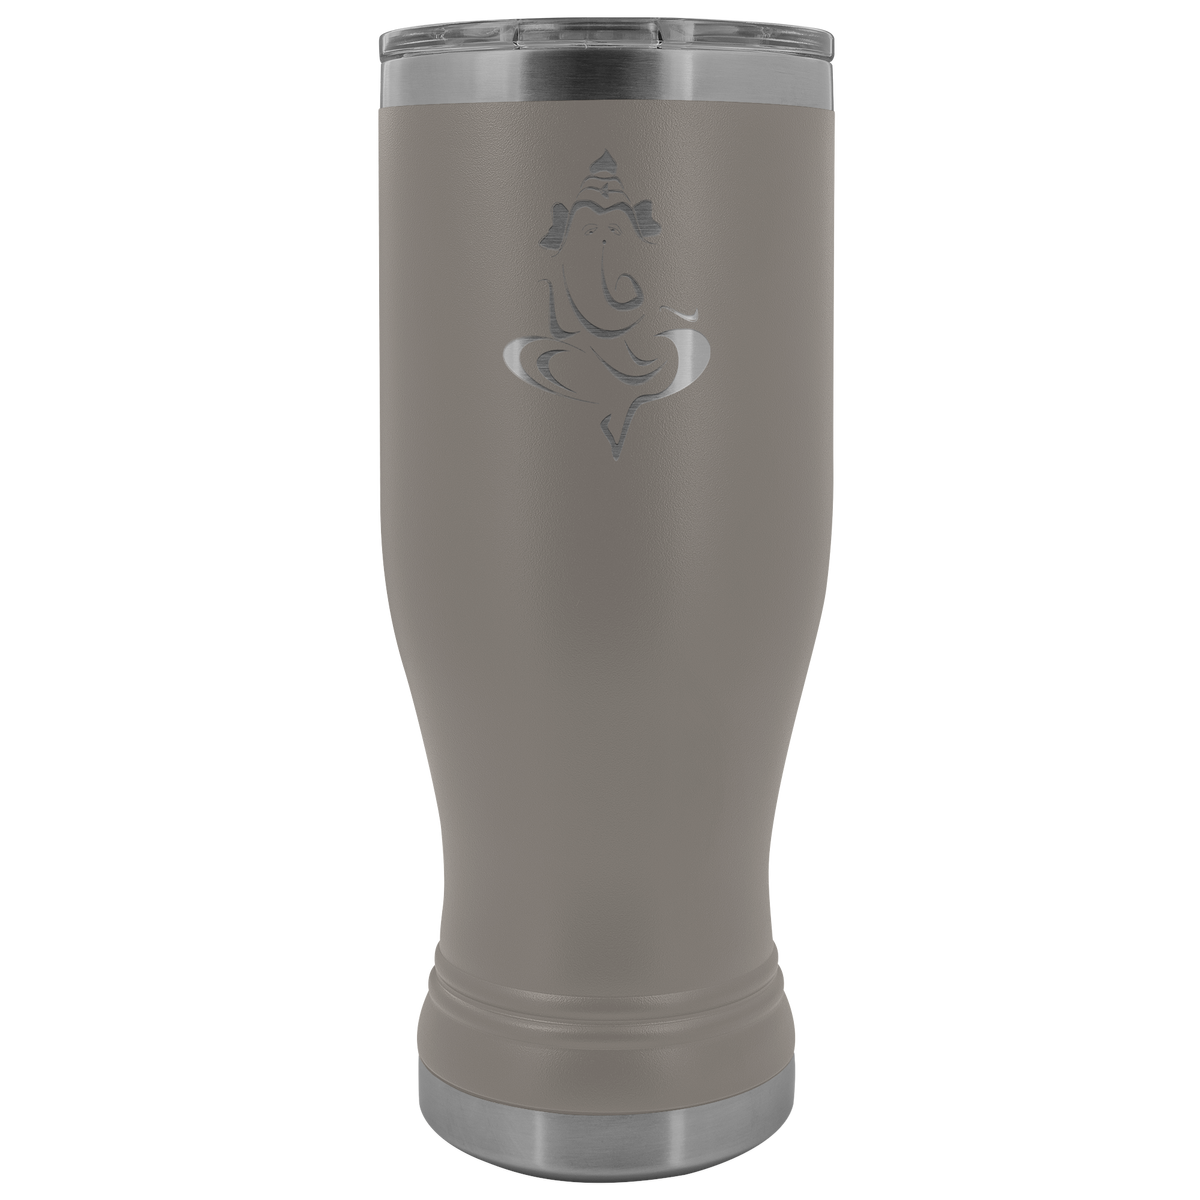 Indian Ganesha (Vinayagar) stainless steel vacuum insulated hot and cold beverage container